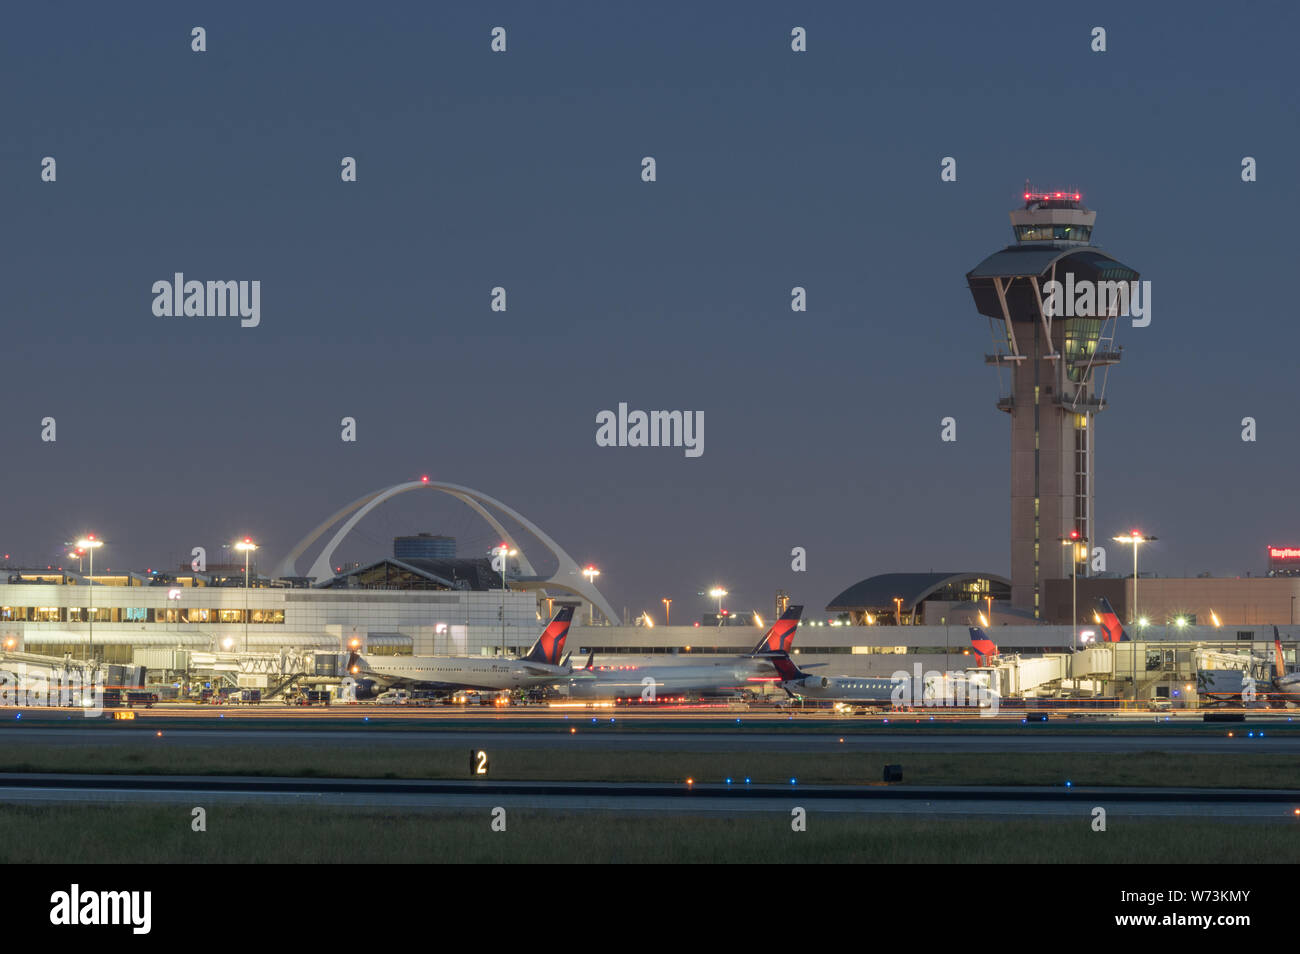 Image of the Theme Building, control tower, and Delta Air Lines jets at the gate, in the Los Angeles International Airport, LAX, at dusk. Stock Photo